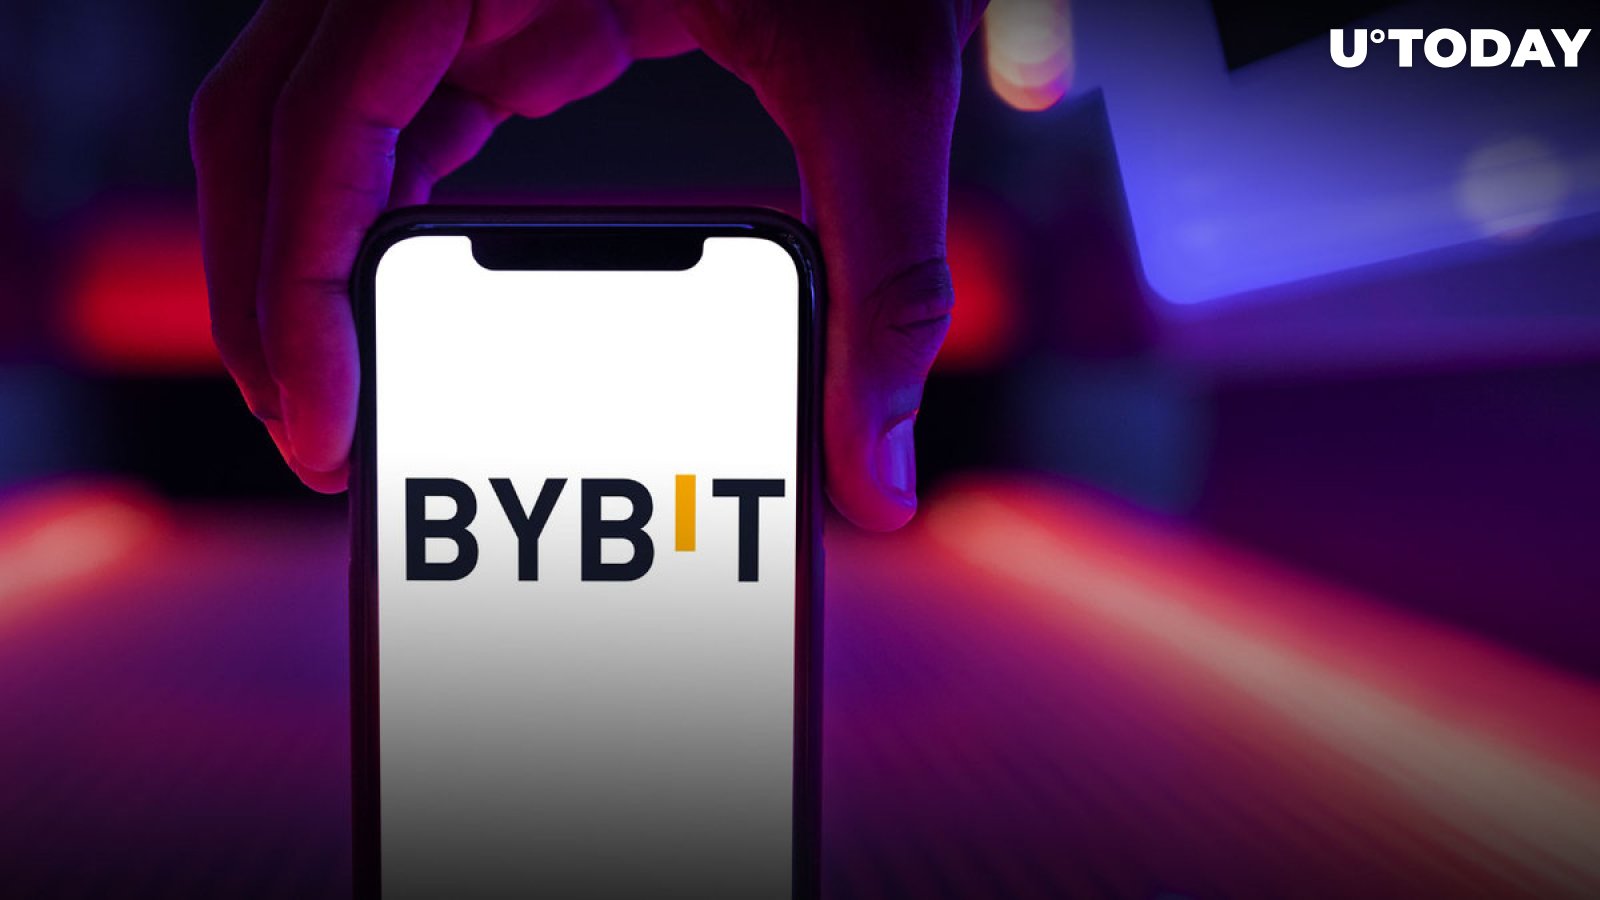 Bybit's Futures Trading Volume Increases Fivefold, Jumps to $13.8 Billion